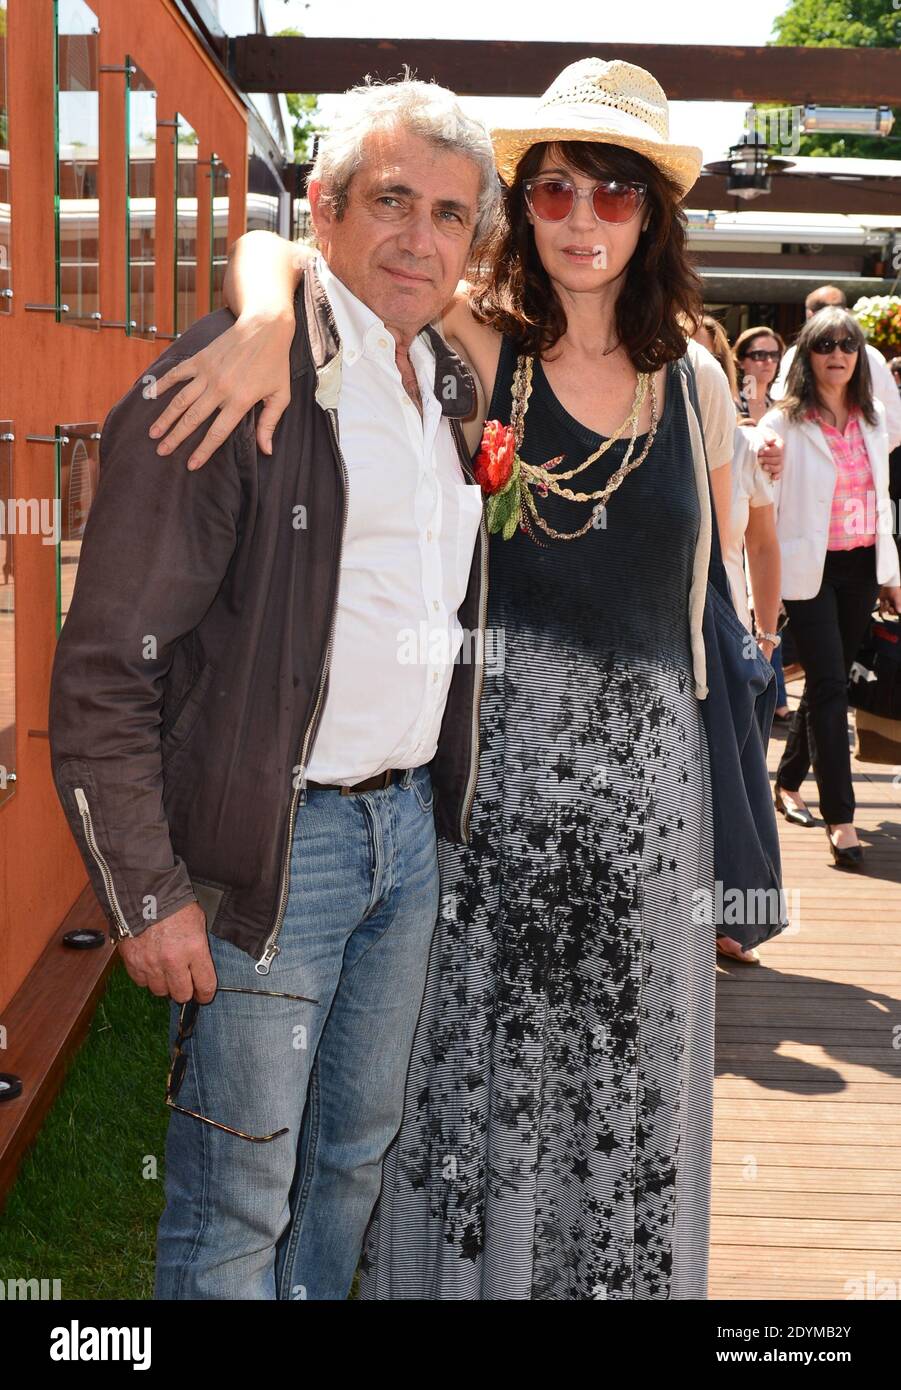 Michel Boujenah and Zabou Breitman stopping by the Village, the VIP quarter  of the French Tennis Open 2013 at Roland Garros arena in Paris, France, on  June 07, 2013. Photo by Jeremy